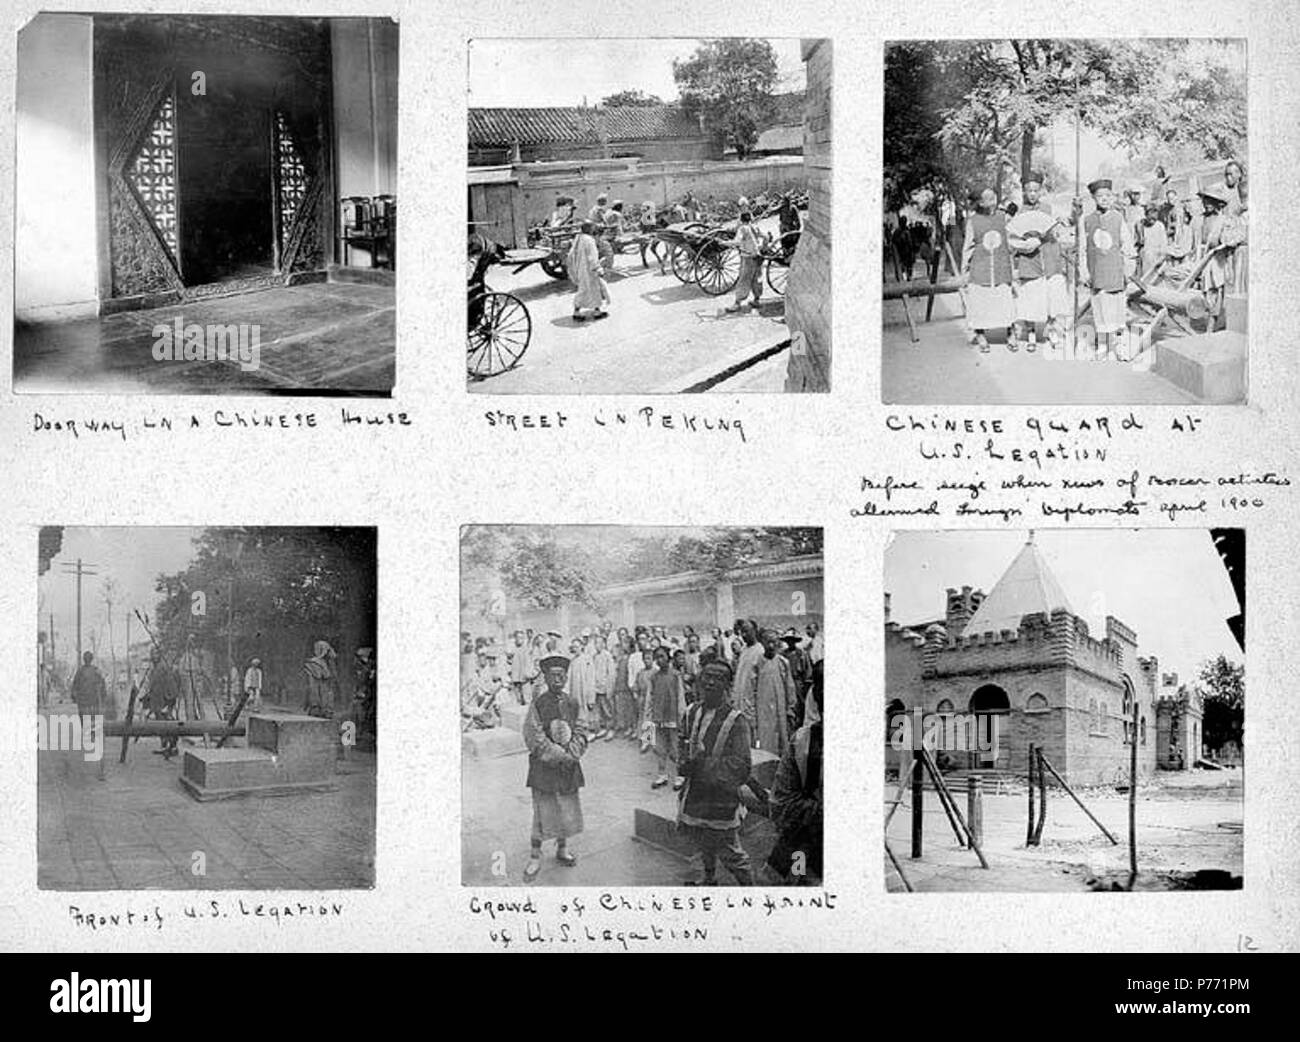 . English: 7.12 Scenes near U.S. legation, Peking, 1900 . English: Caption on album page: Doorway in a Chinese house; Street in Peking; Chinese guard at U.S. legation; Before seige when news of Boxer activities allarmed [i.e. alarmed] foreign diplomats, April 1900; Front of U.S. Legation; Crowd of Chinese in front of U.S. Legation . PH Coll 241.B12a-f Subjects (LCTGM): Doors & doorways--China--Beijing; Streets--China--Beijing; Embassies--American--China--Beijing; Guards--China--Beijing; Chinese--Clothing & dress--China--Beijing Subjects (LCSH): China--History--Boxer Rebellion, 1899-1901; Unite Stock Photo